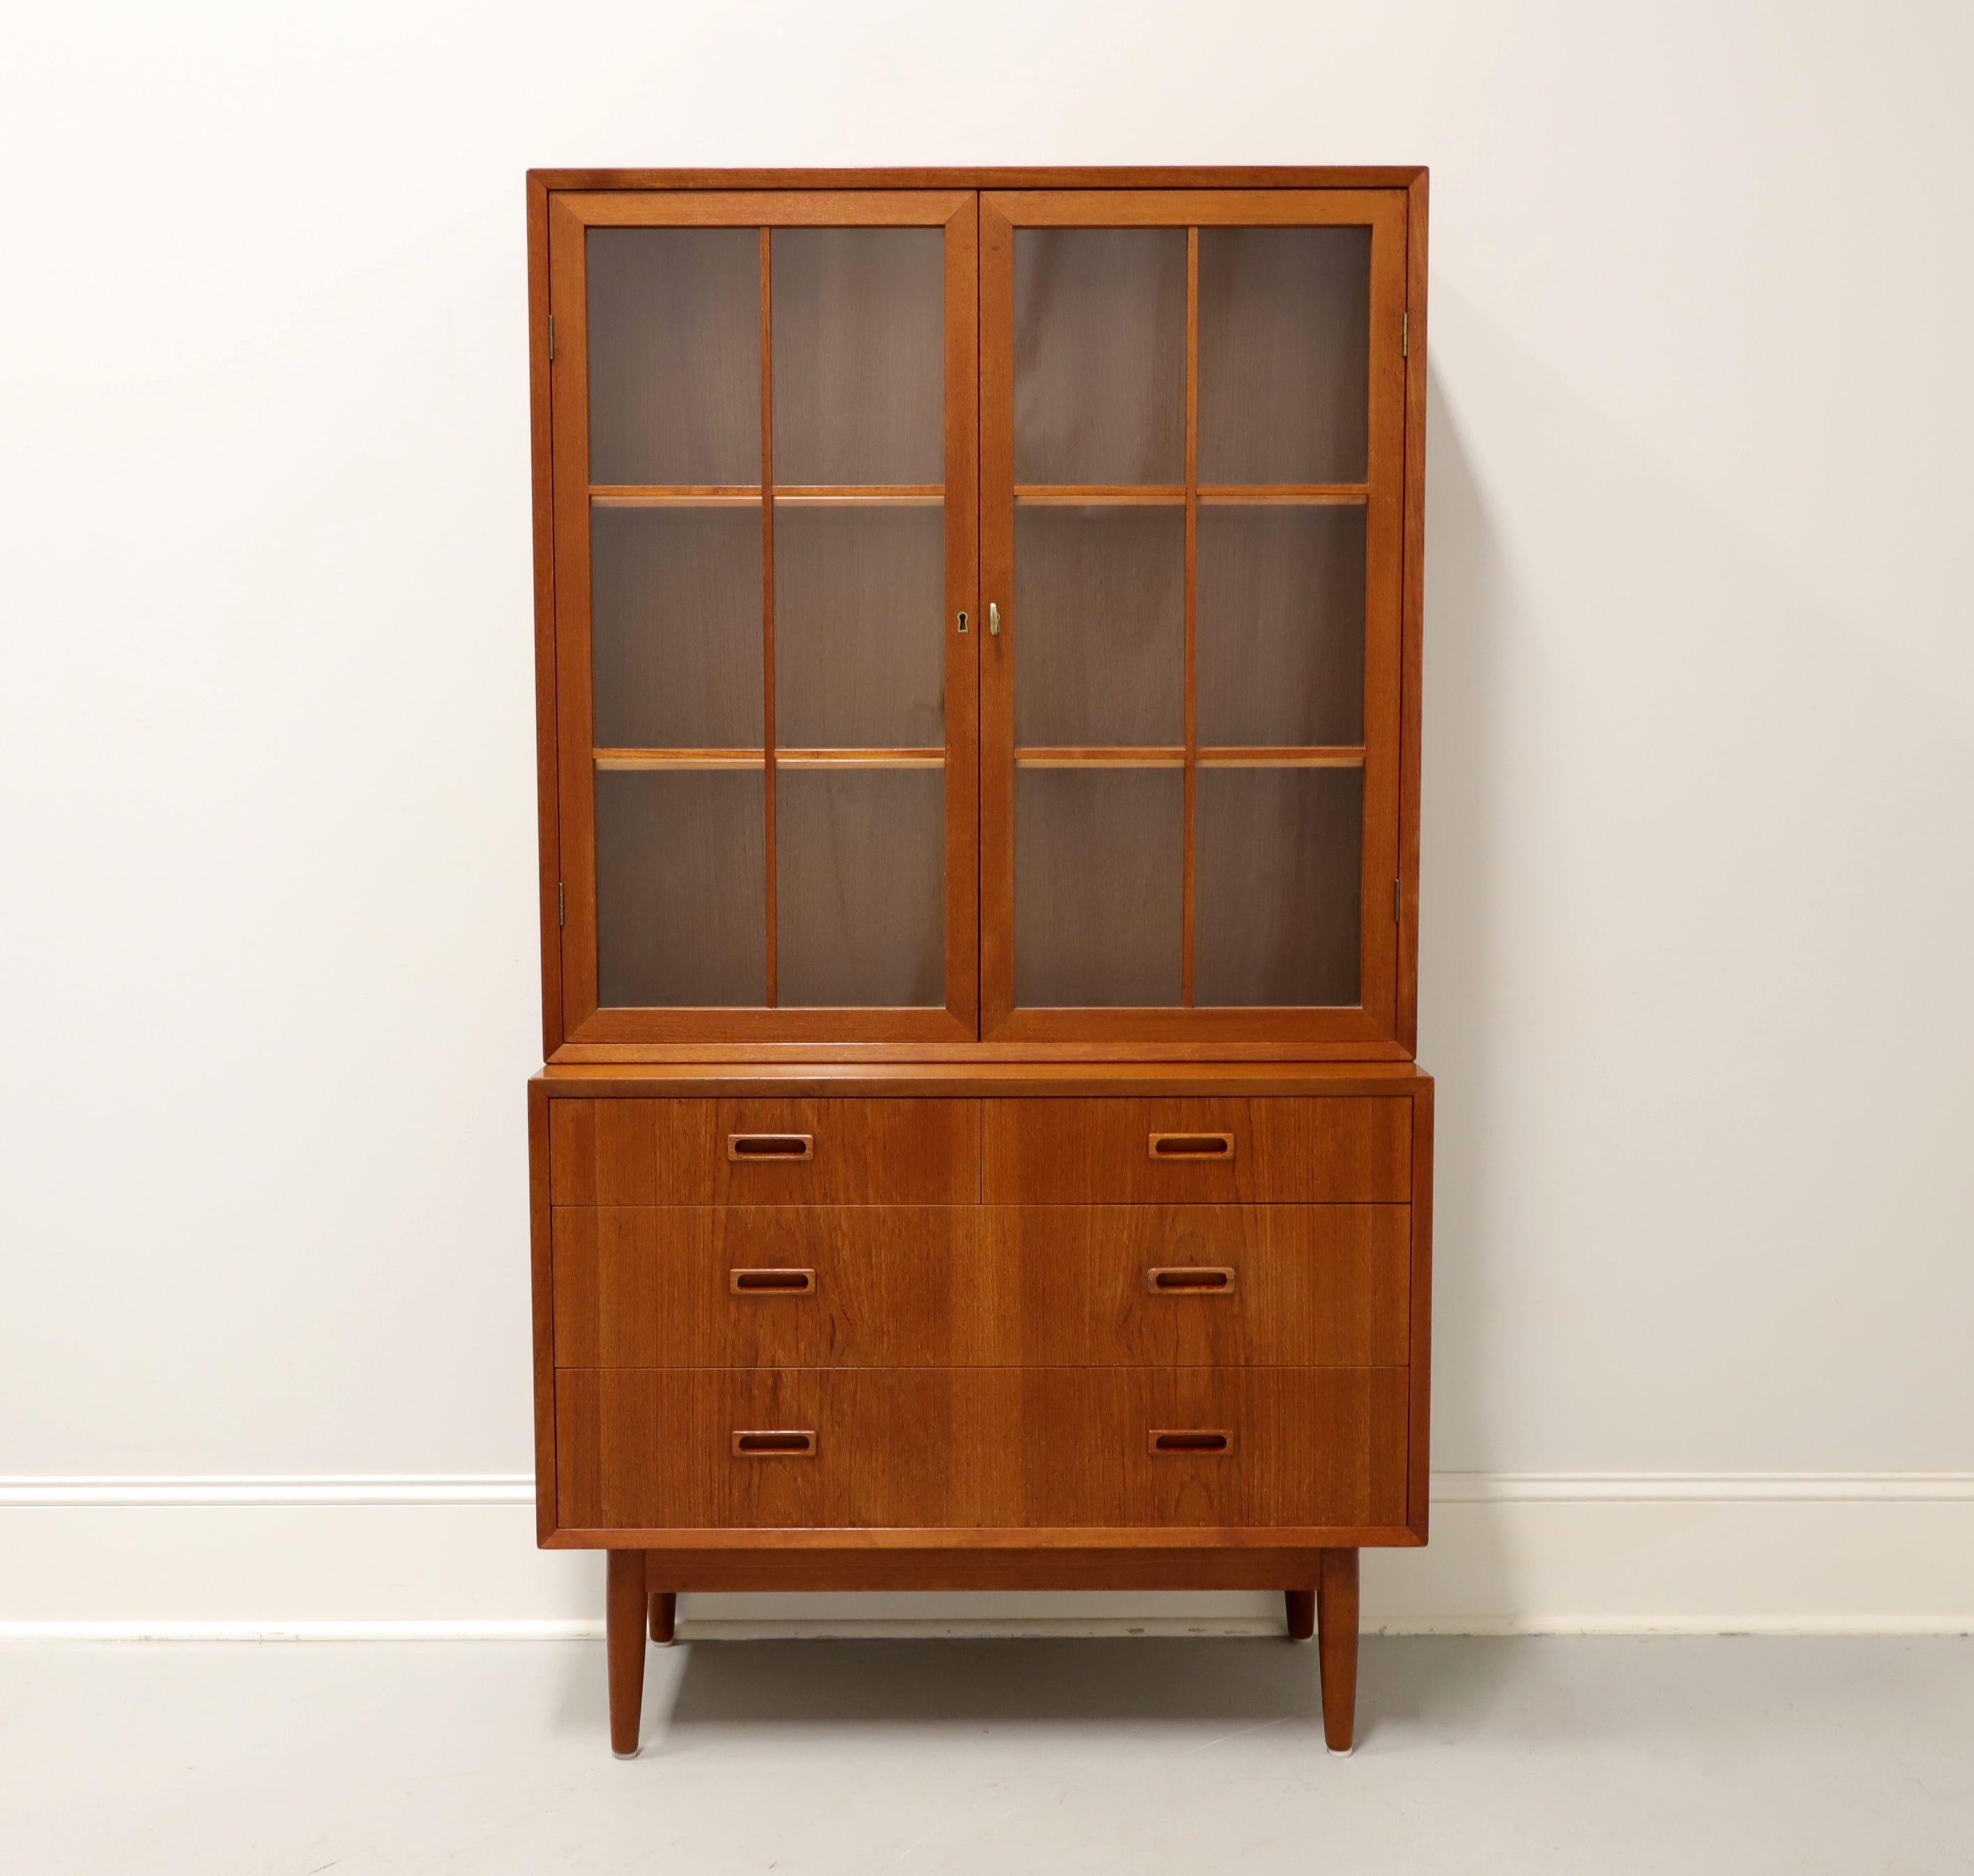 A Danish Modern style display cabinet, unbranded, similar in quality to Dyrlund or Skovby. Teak construction, step-back upper cabinet, squared modern design, elevated lower cabinet with apron and on round tapered legs. Upper cabinet has dual